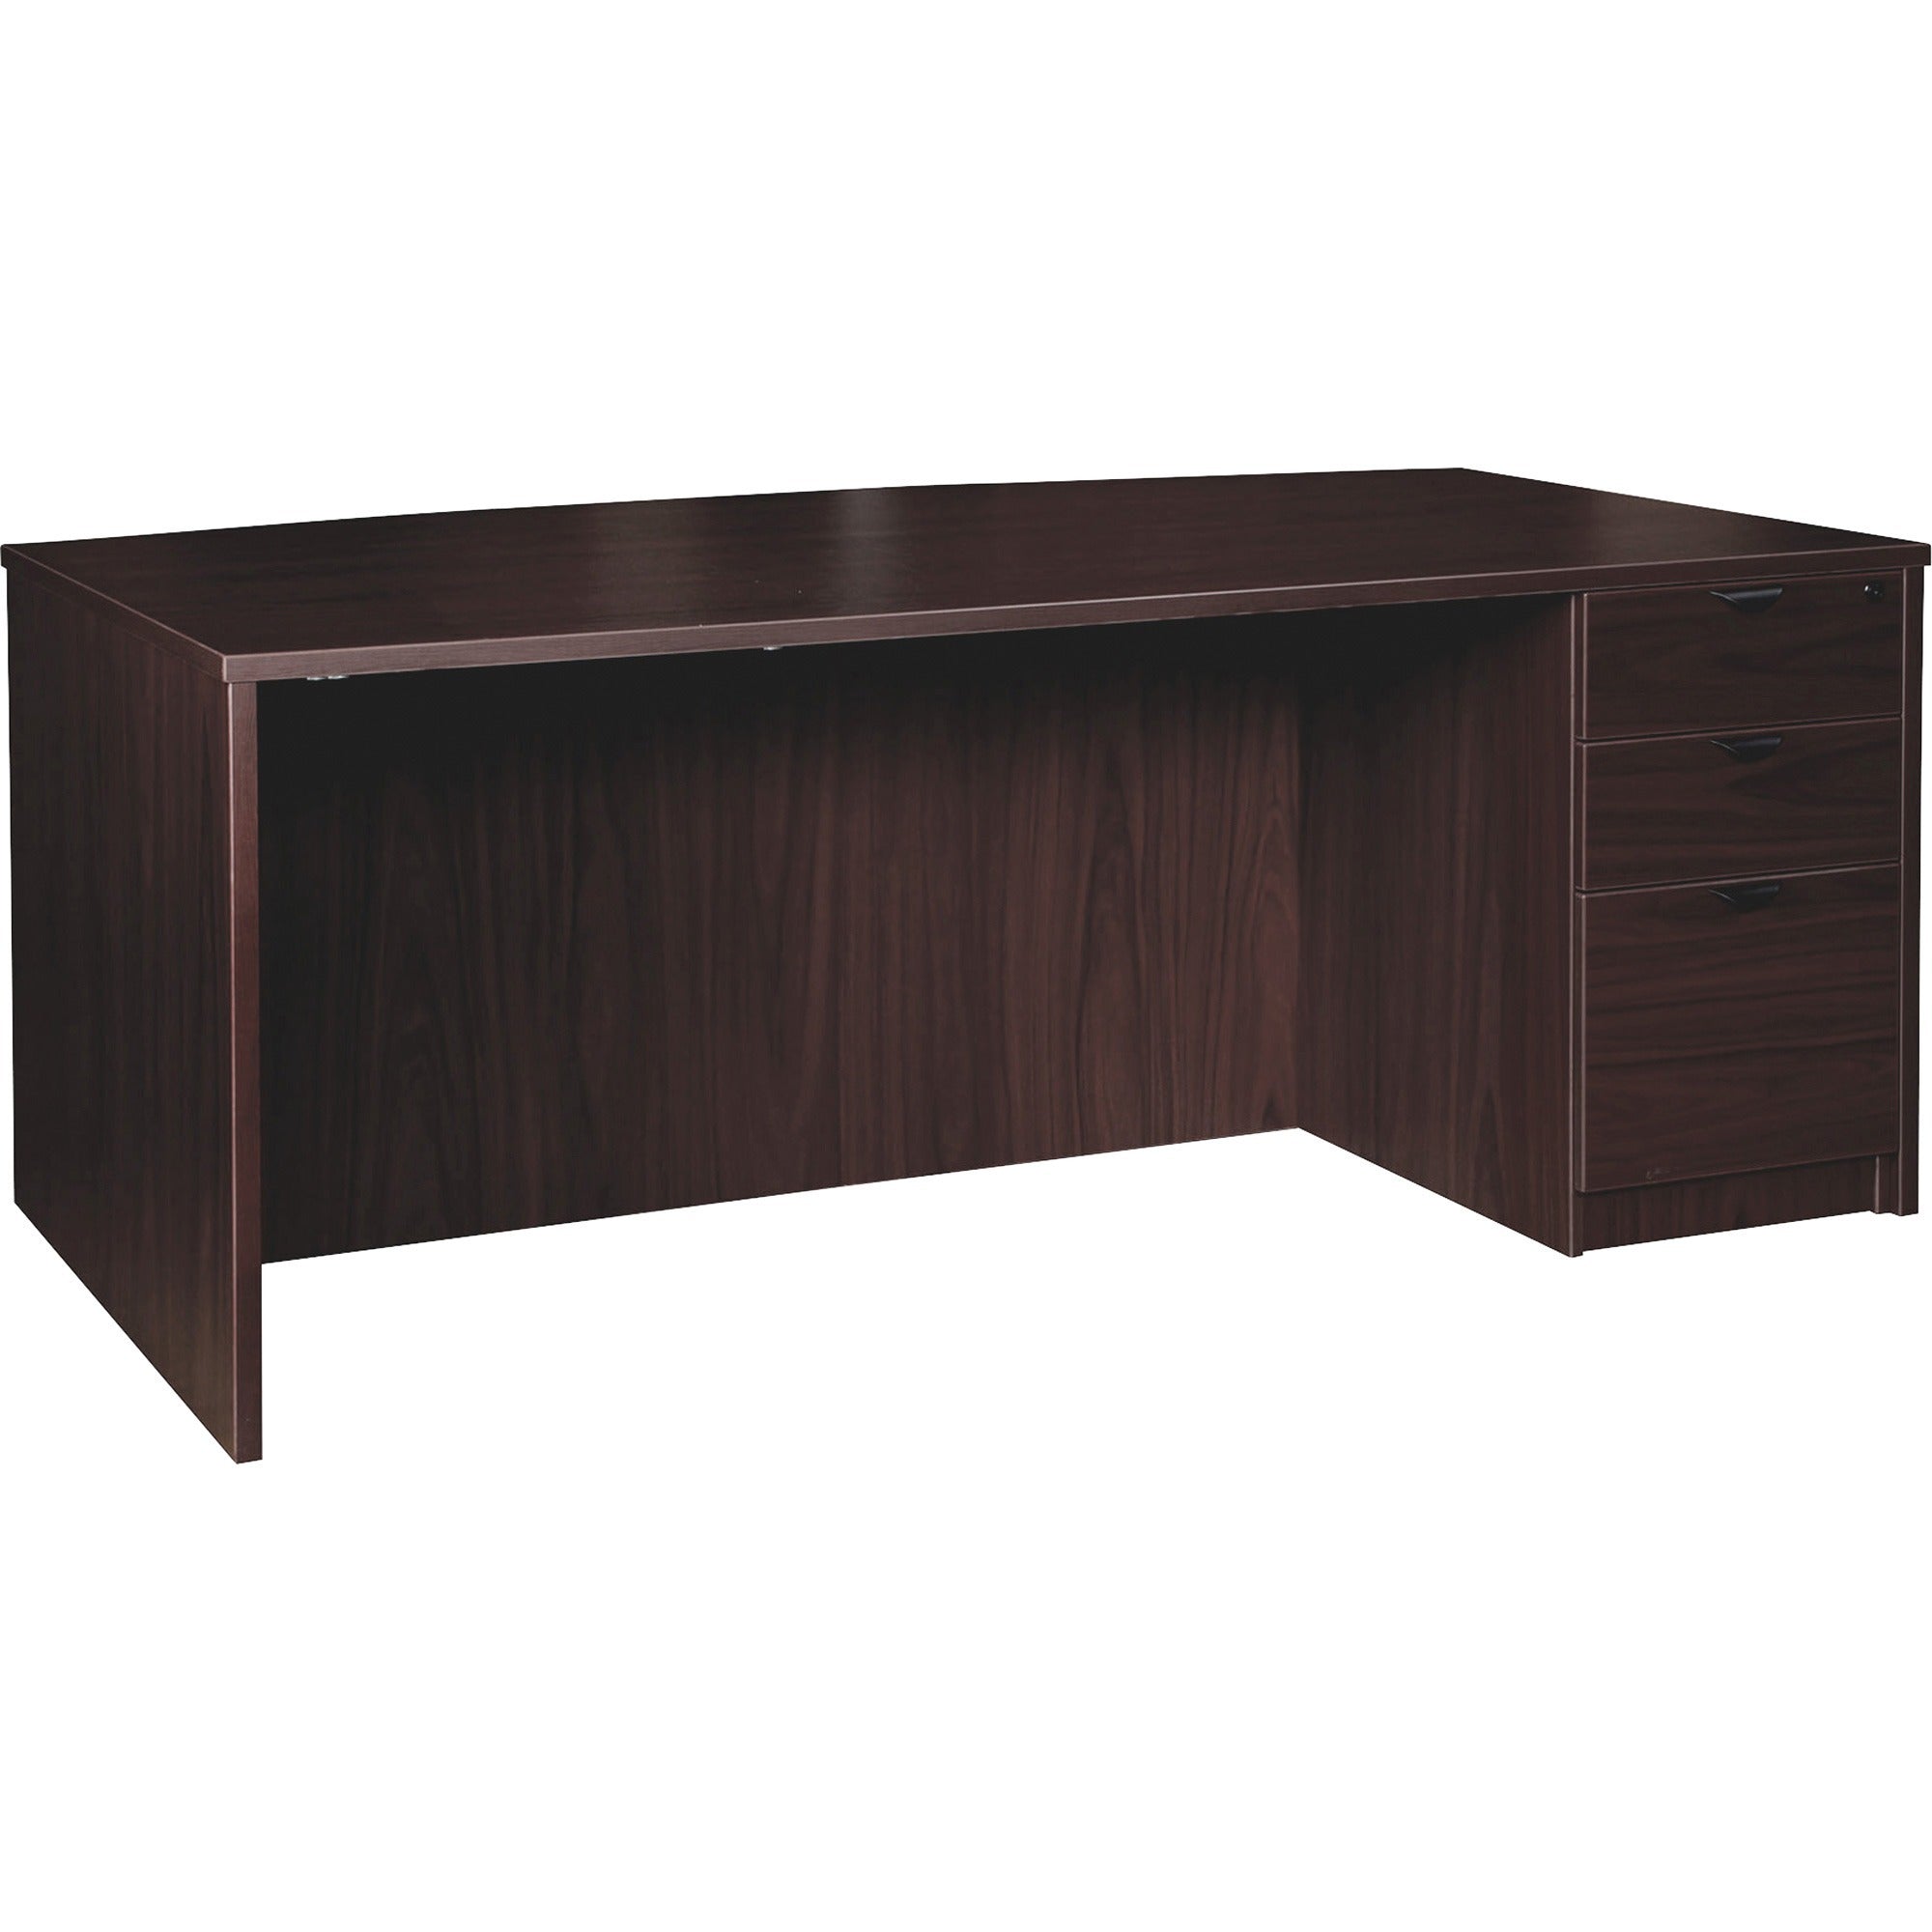 lorell-prominence-20-bowfront-right-pedestal-desk-1-top-72-x-4229-3-x-file-box-drawers-single-pedestal-on-right-side-band-edge-material-particleboard-finish-espresso-laminate-thermofused-melamine-tfm_llrpd4272rspes - 1